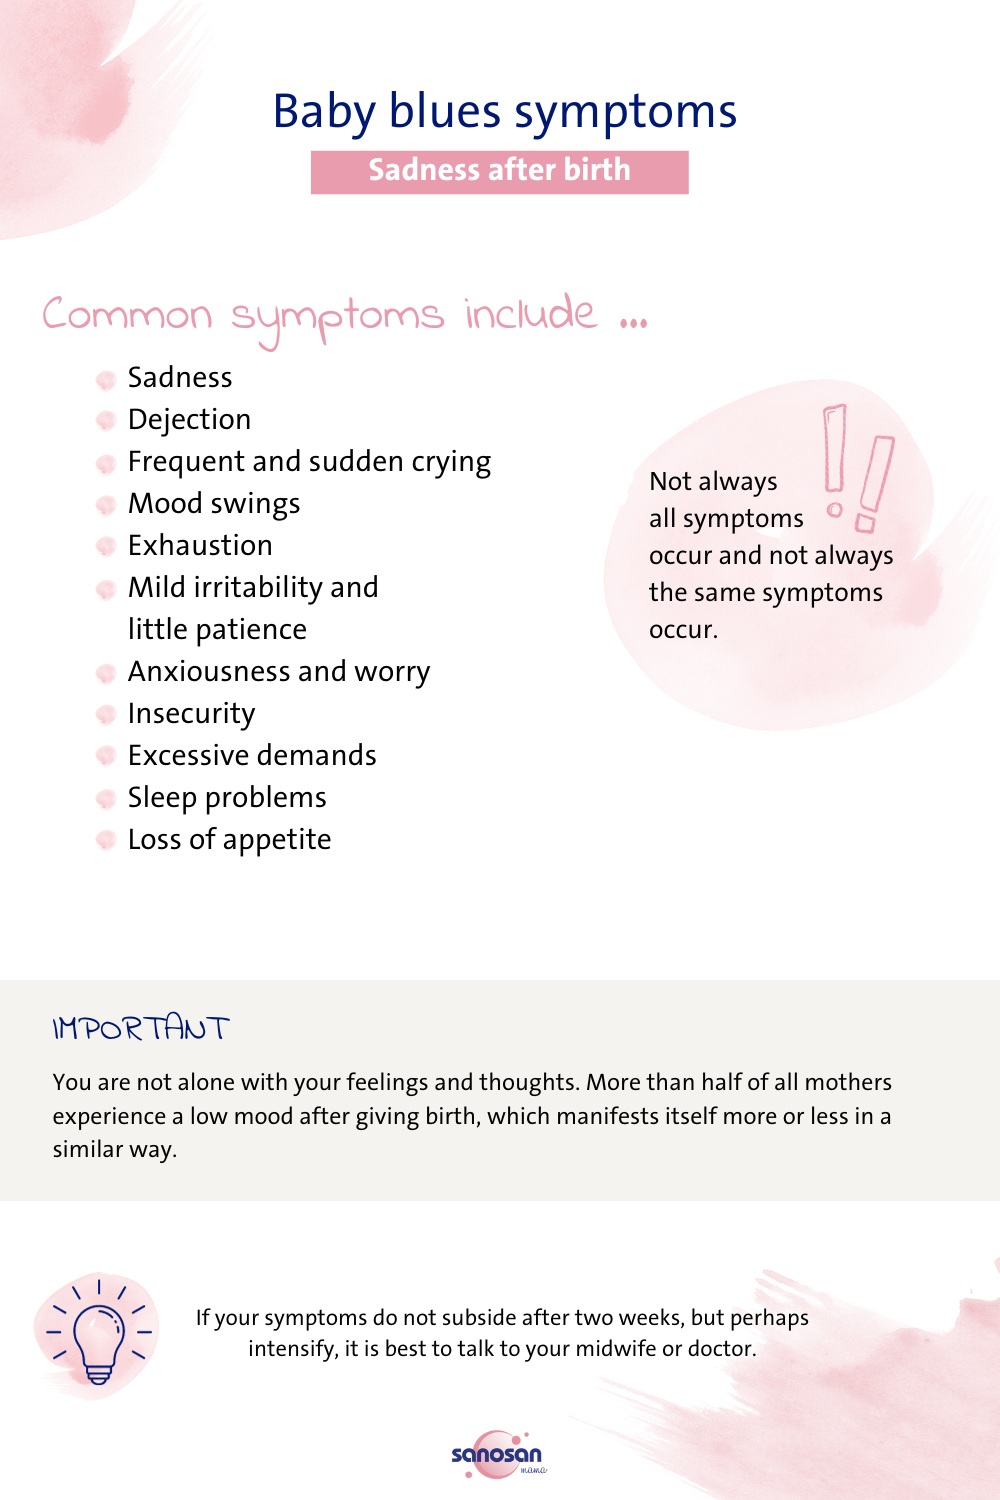 infografic on the symptoms of baby blues